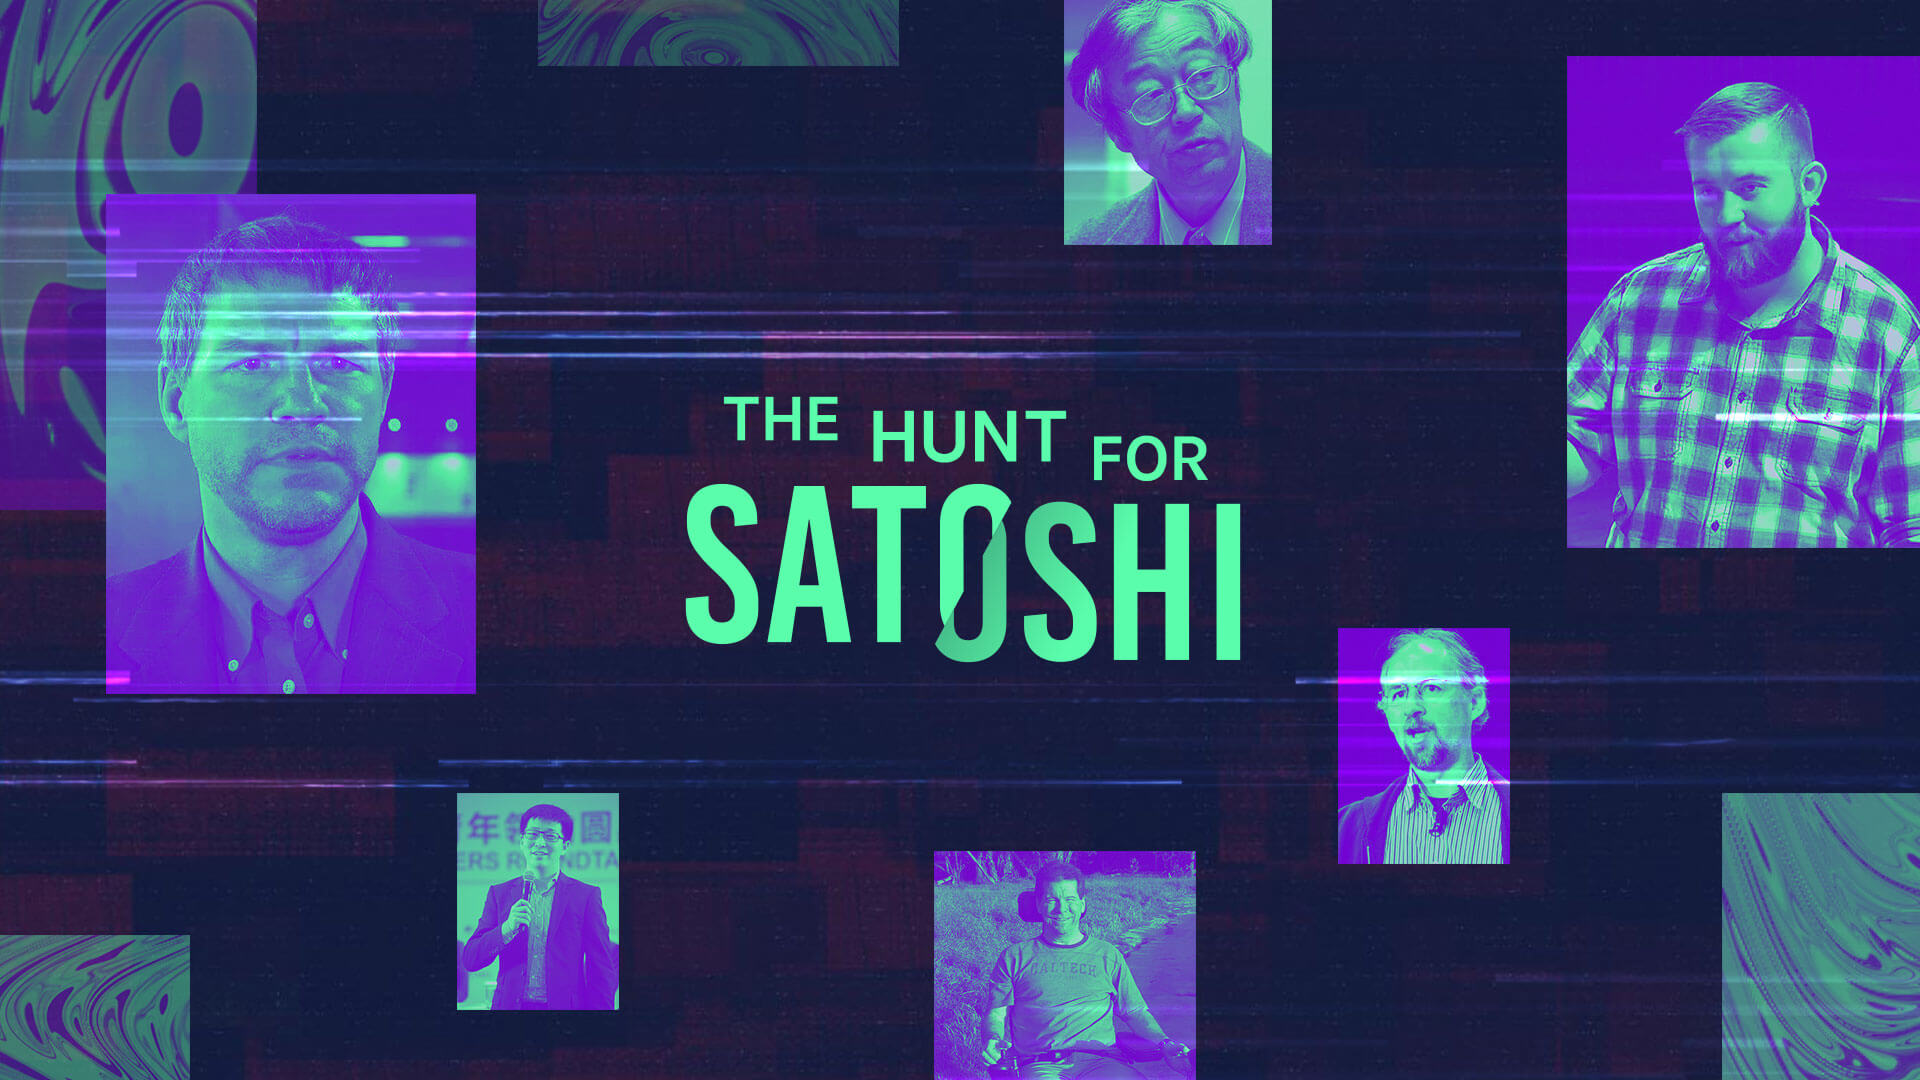 Cast your vote in The Hunt for Satoshi Image